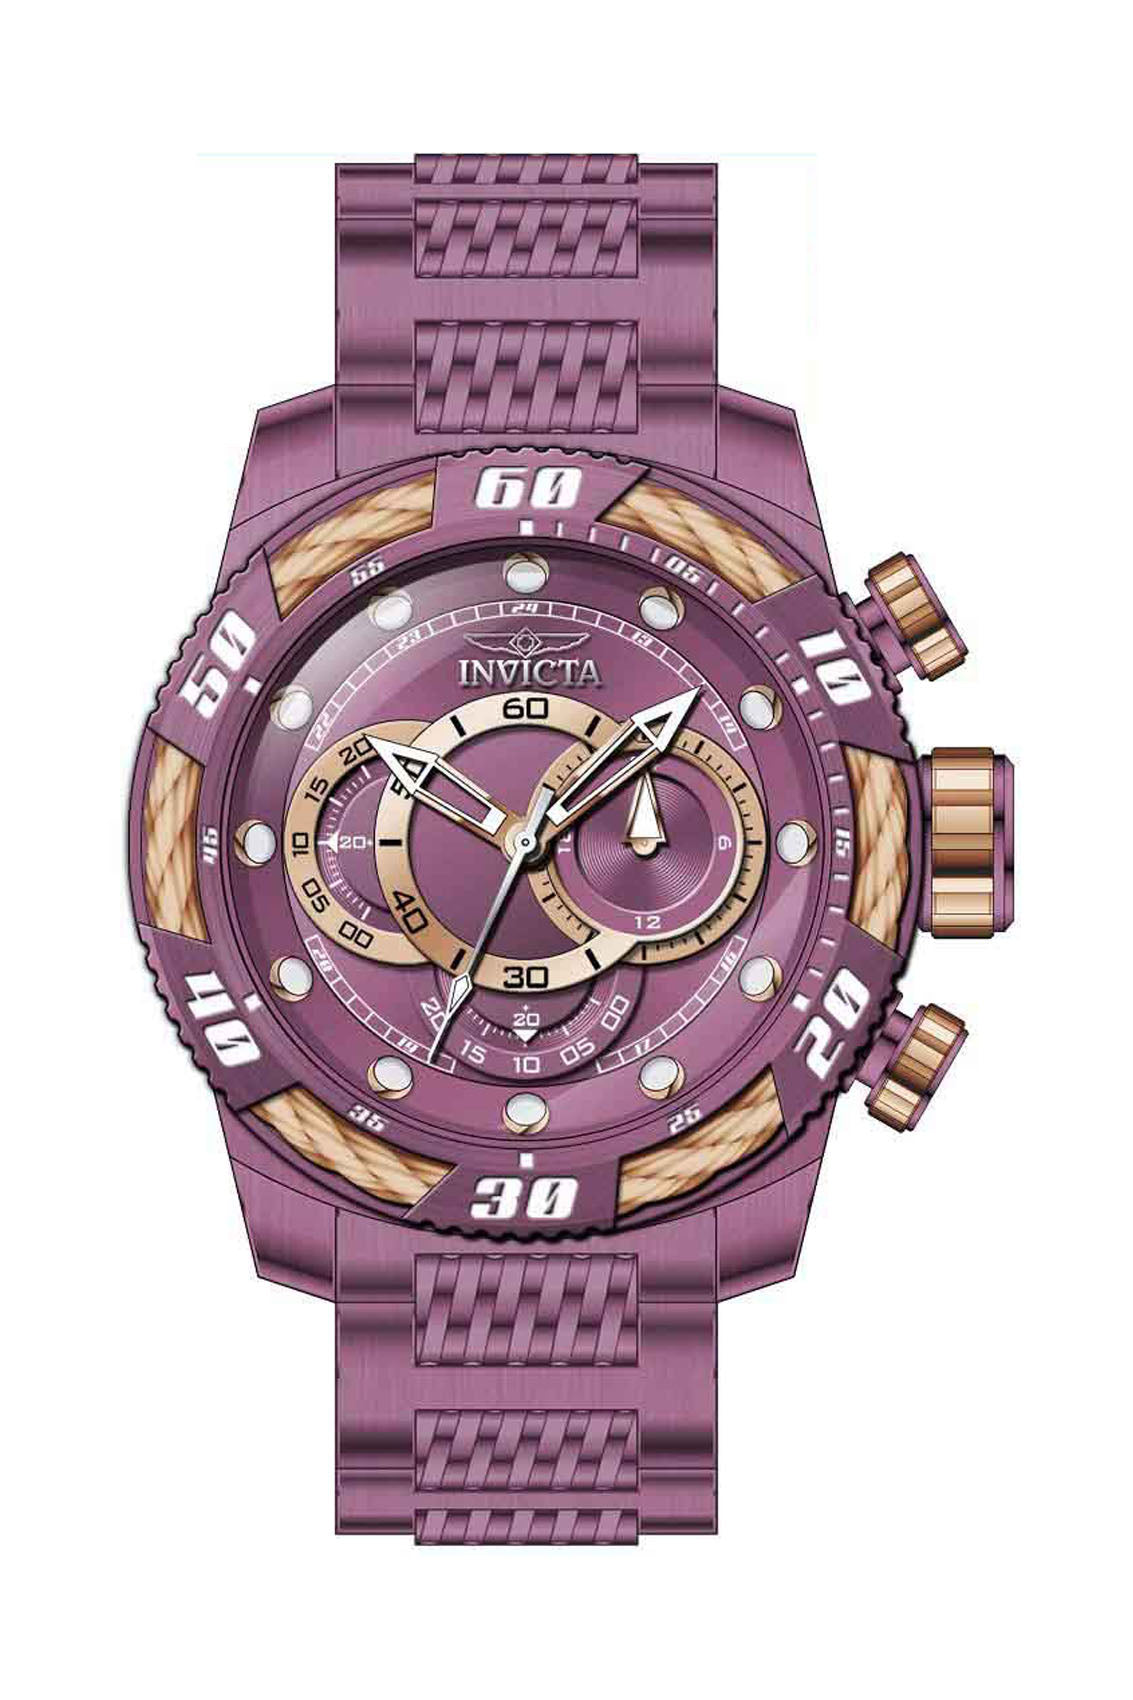 Band for Invicta Speedway Men 40777